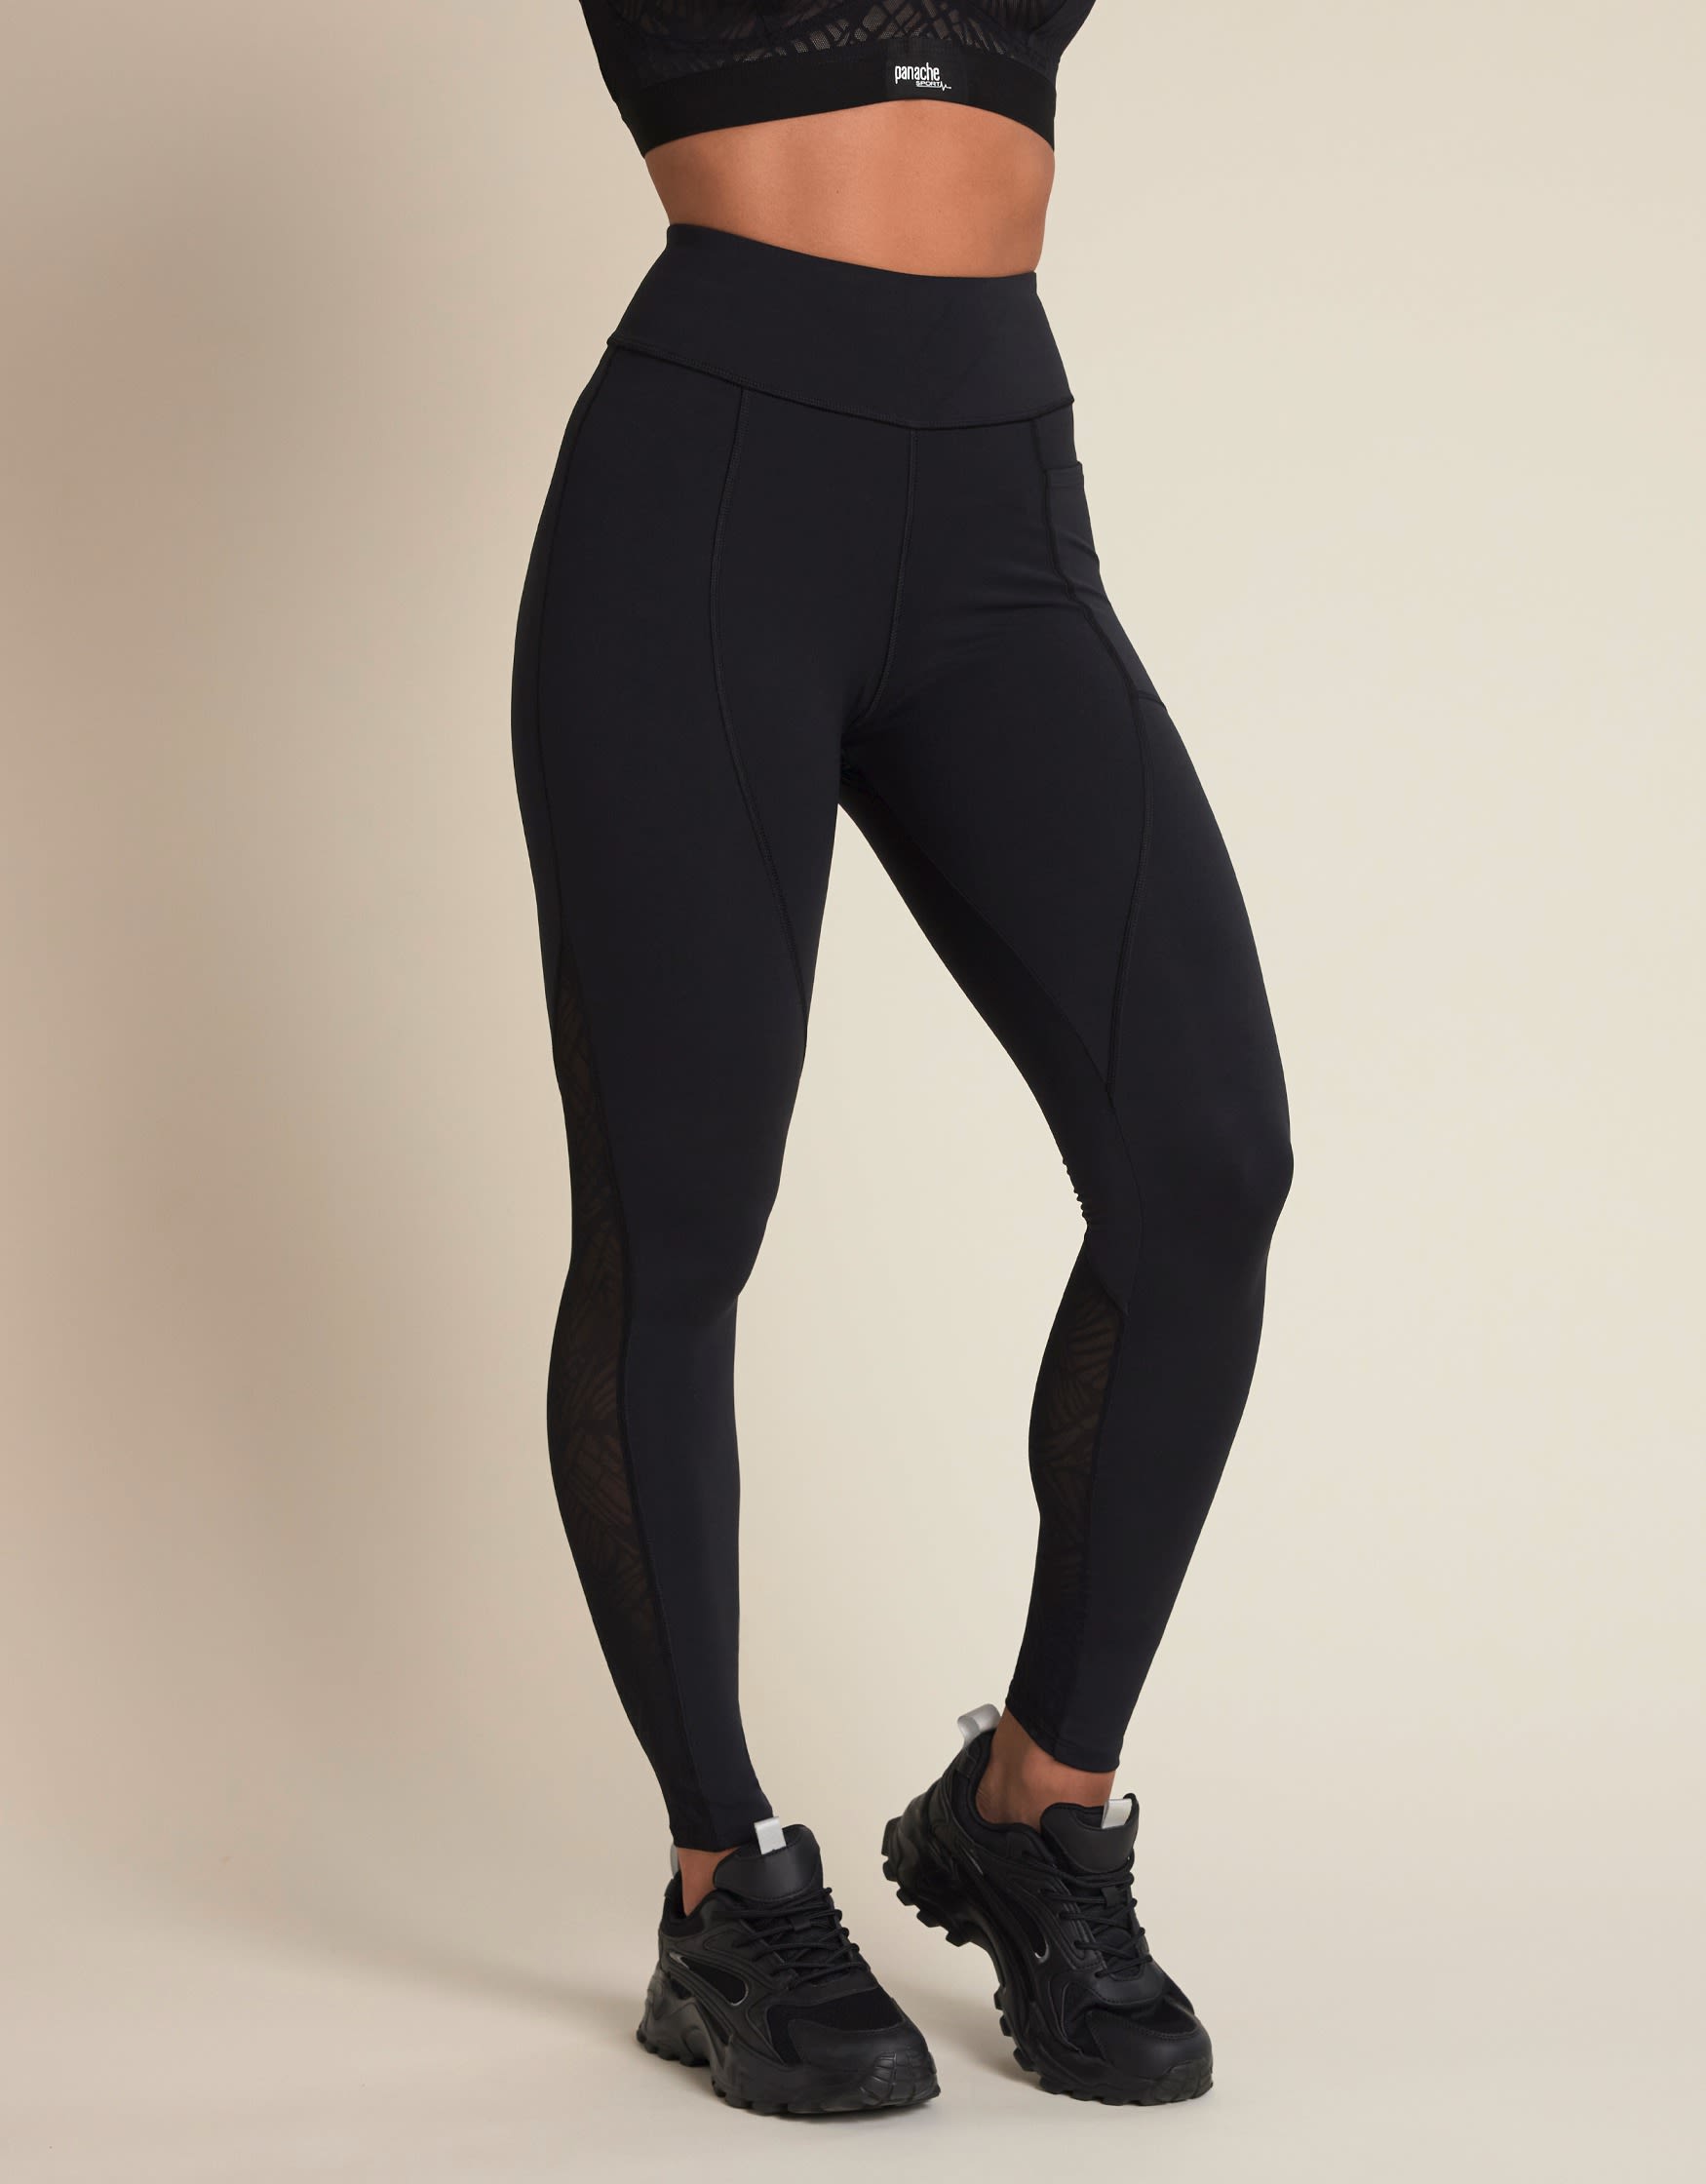  Other Stories polyamide sport leggings in black, Size 4